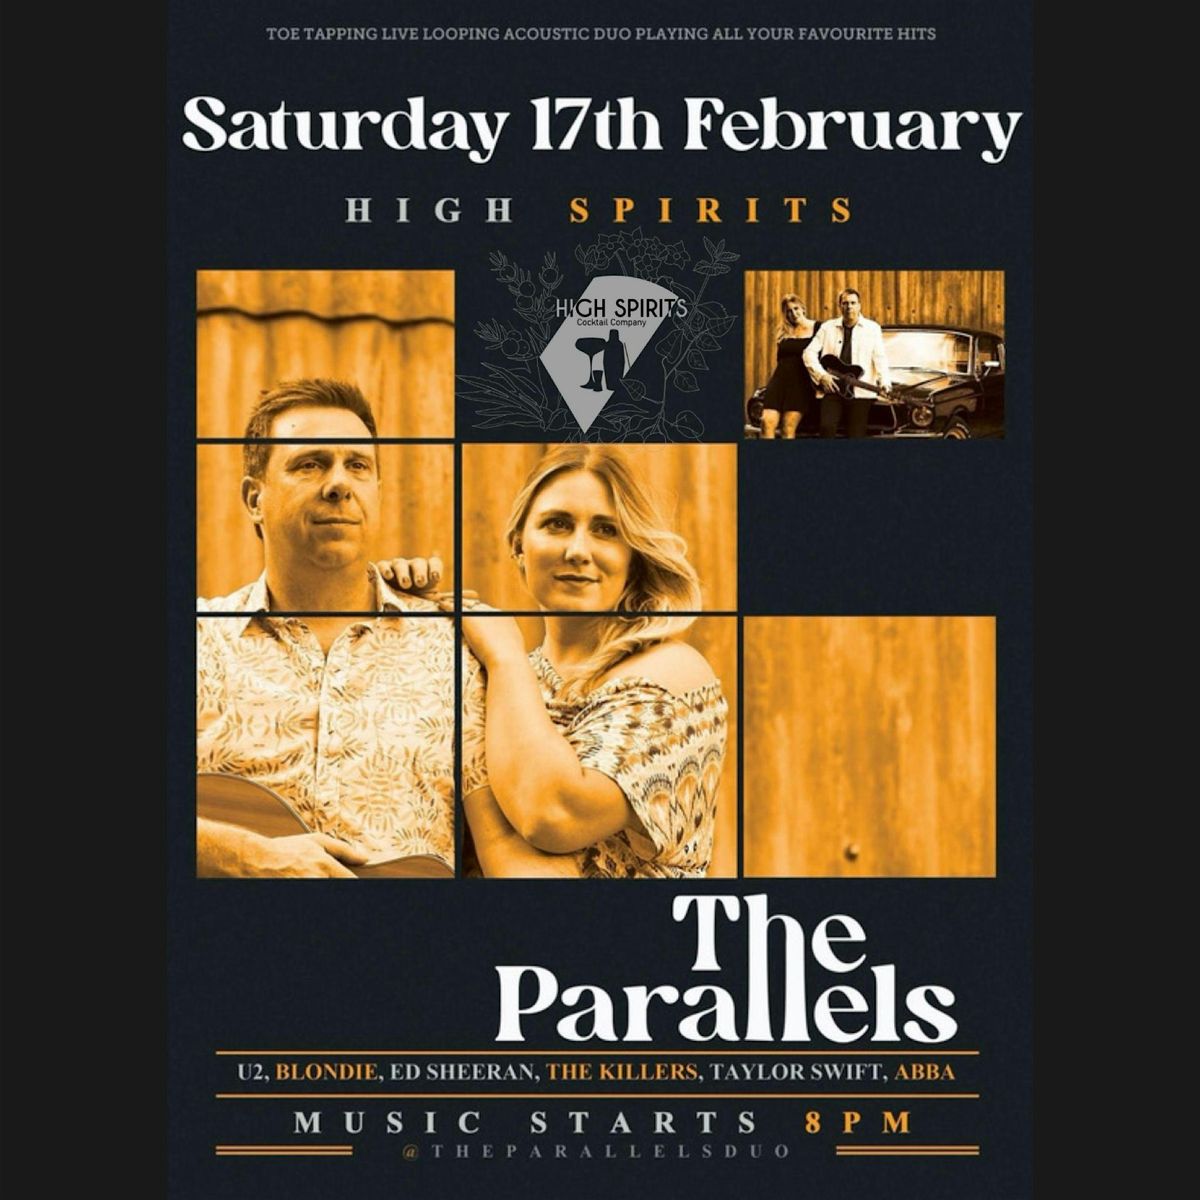 Live Music Night - The Parallels (ARE BACK!)